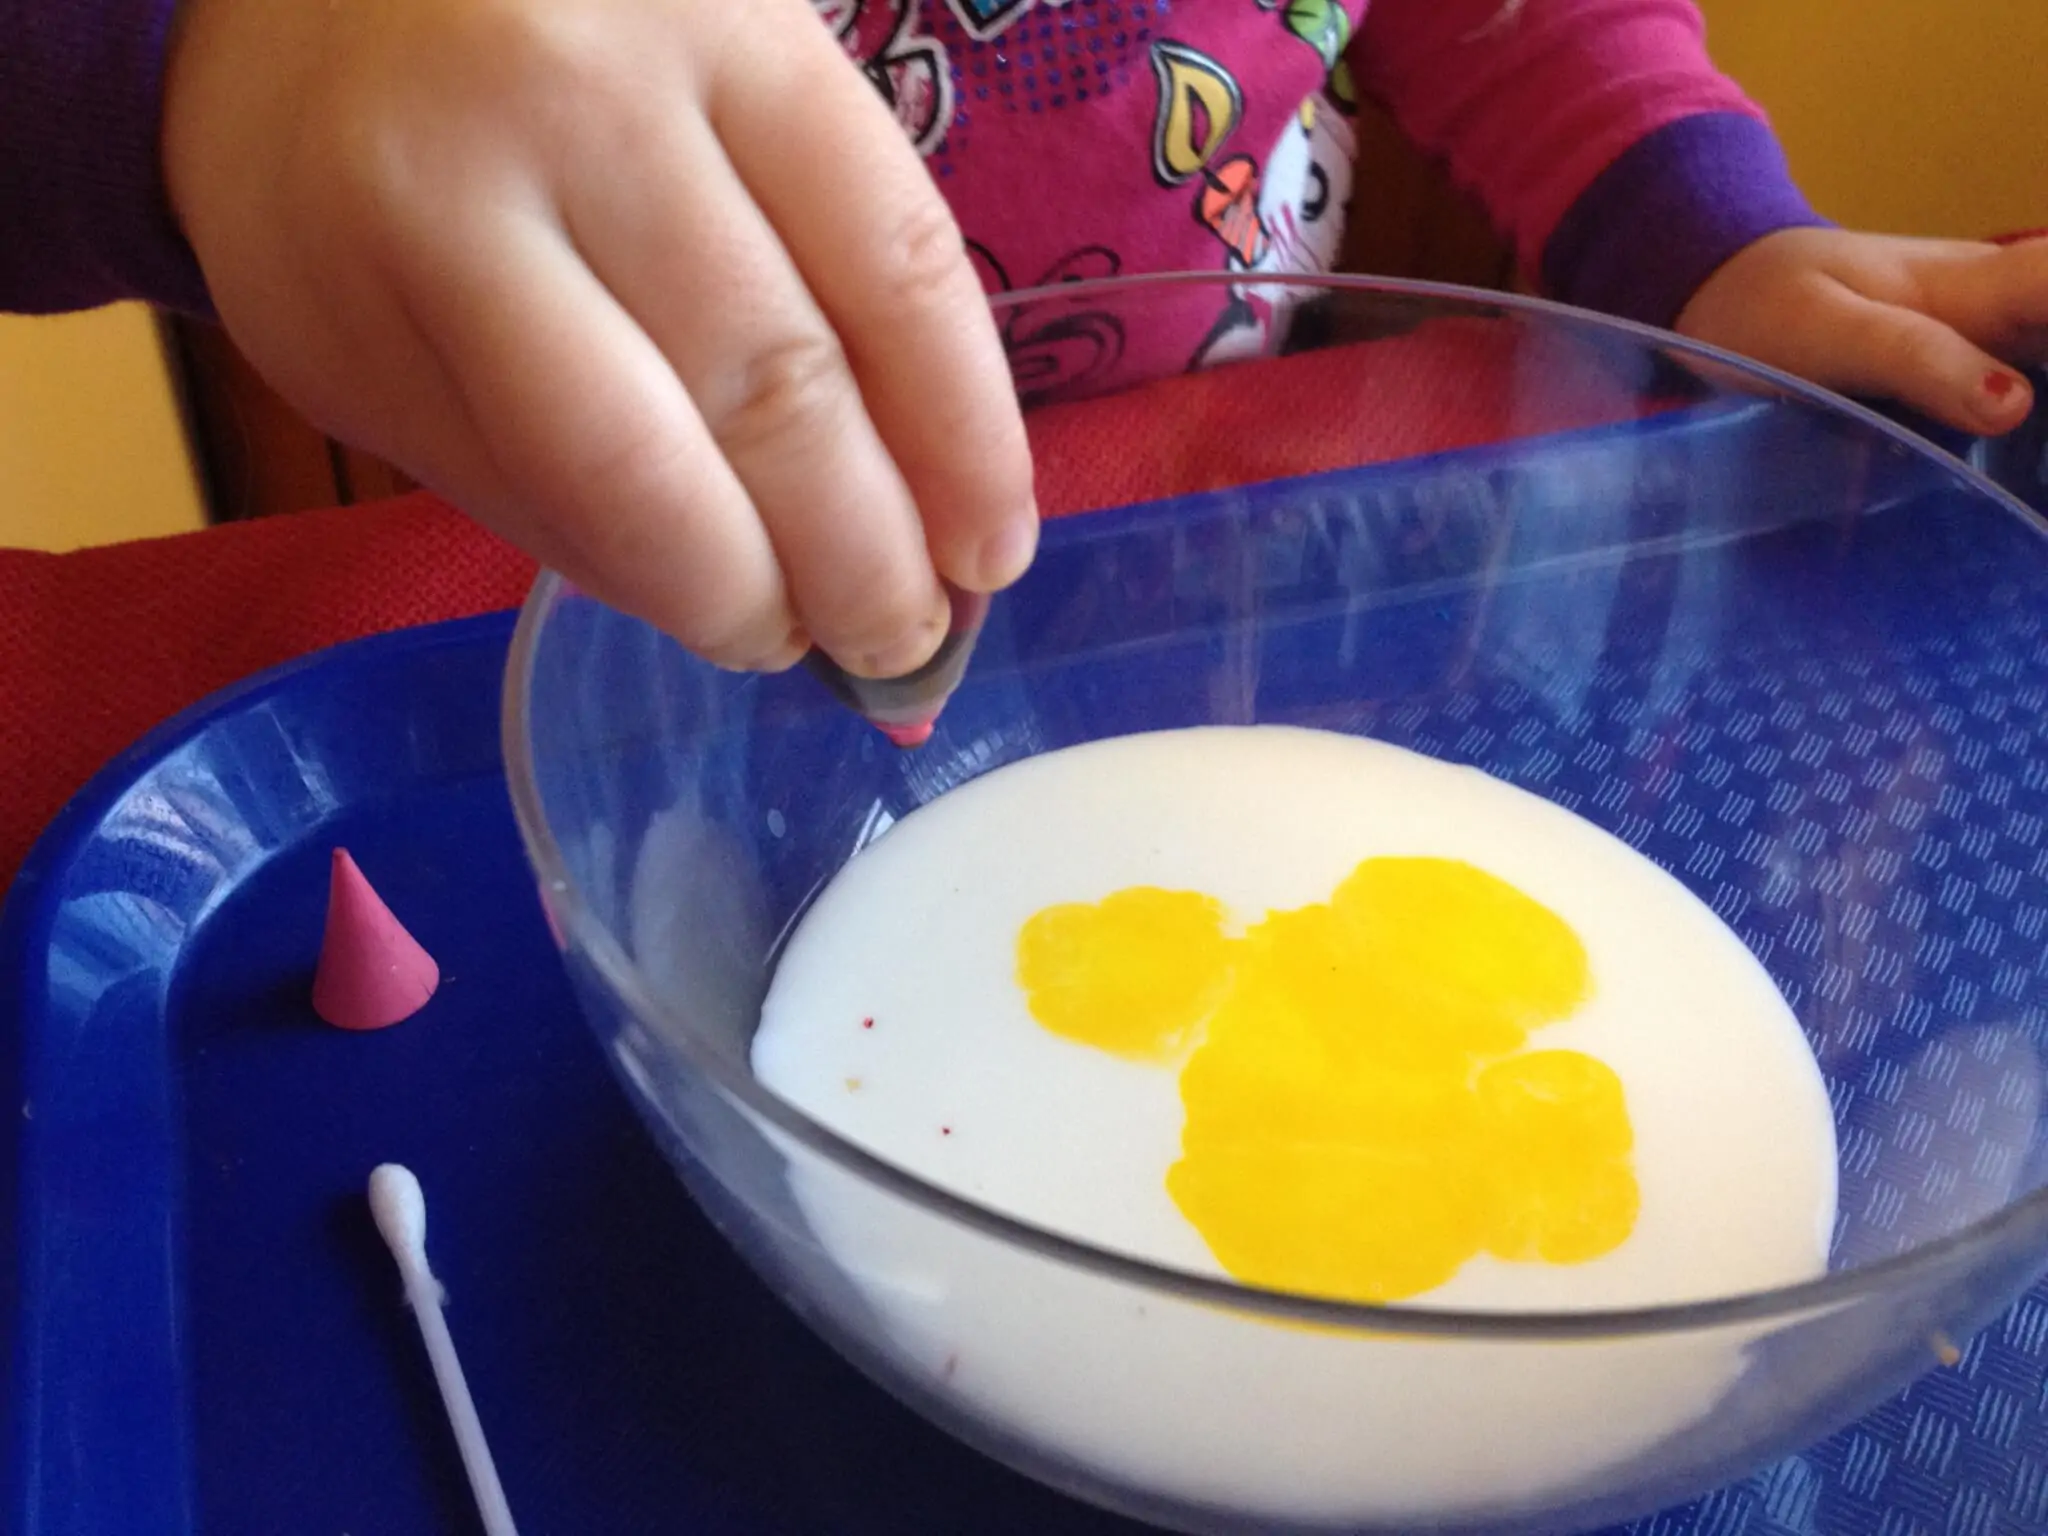 milk and dish soap experiment: engage fine motor AND impulse control in this fun science experiment